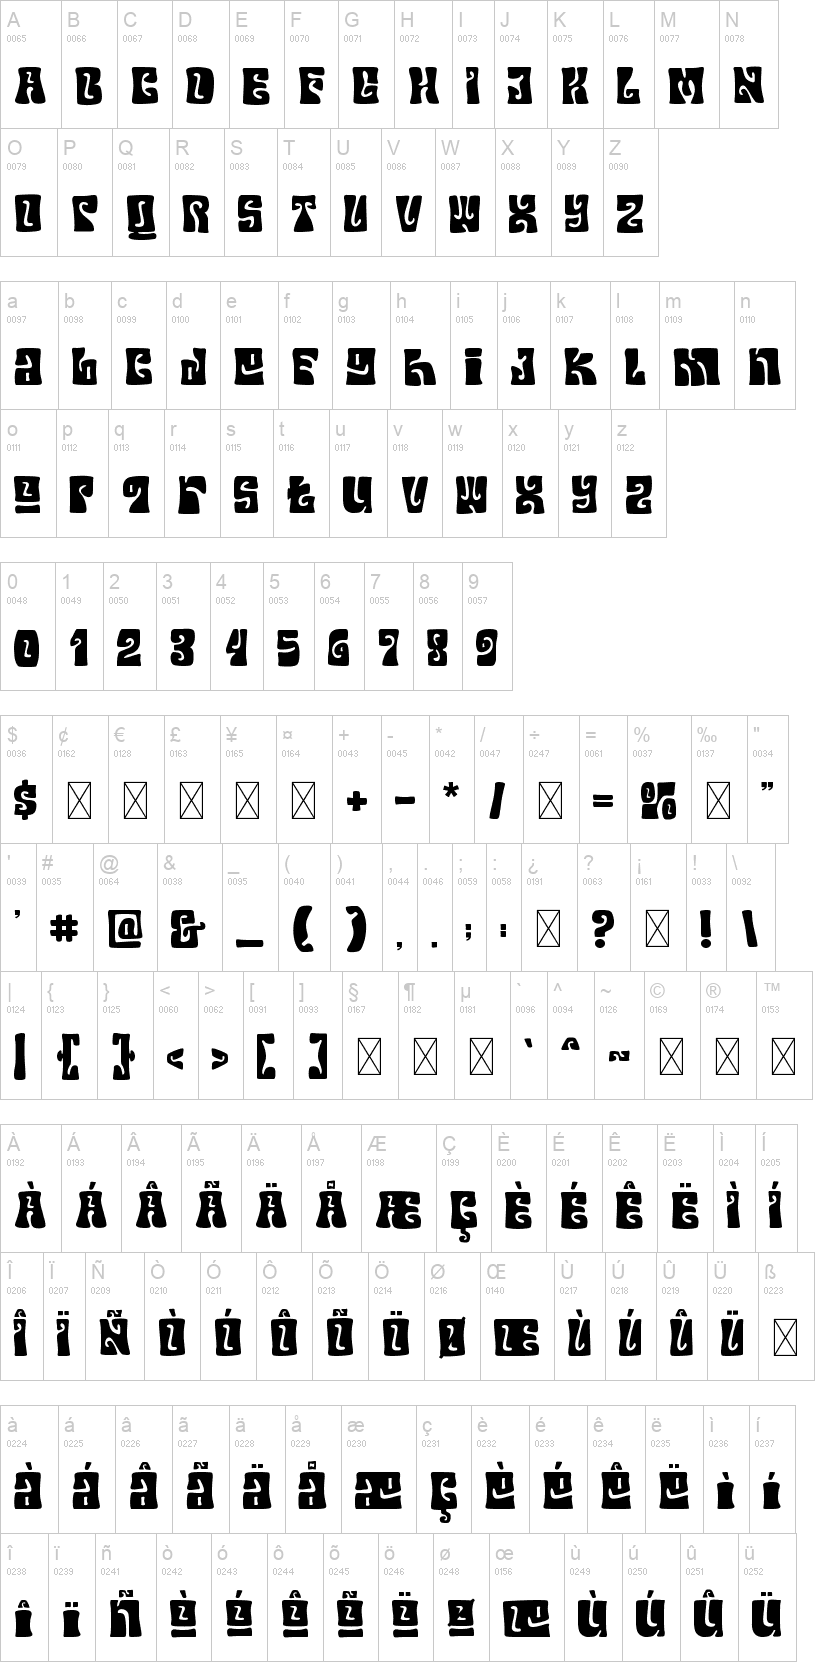 Your Groovy Font